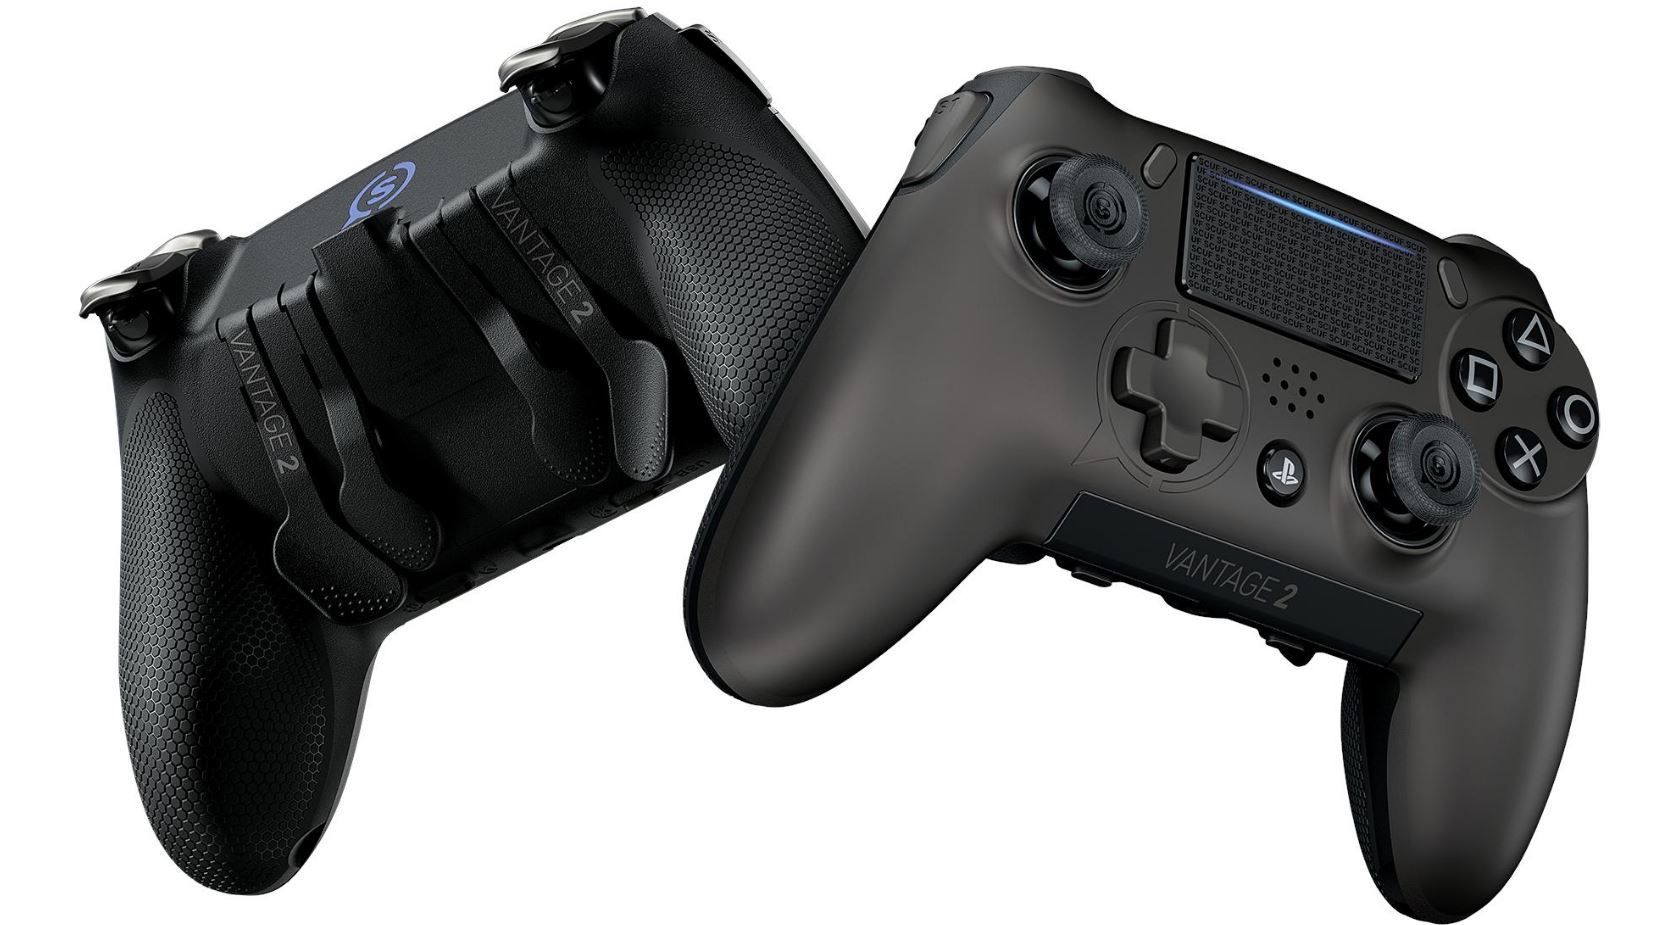 SCUF Vantage 2 Striving To One Up Its Predecessor